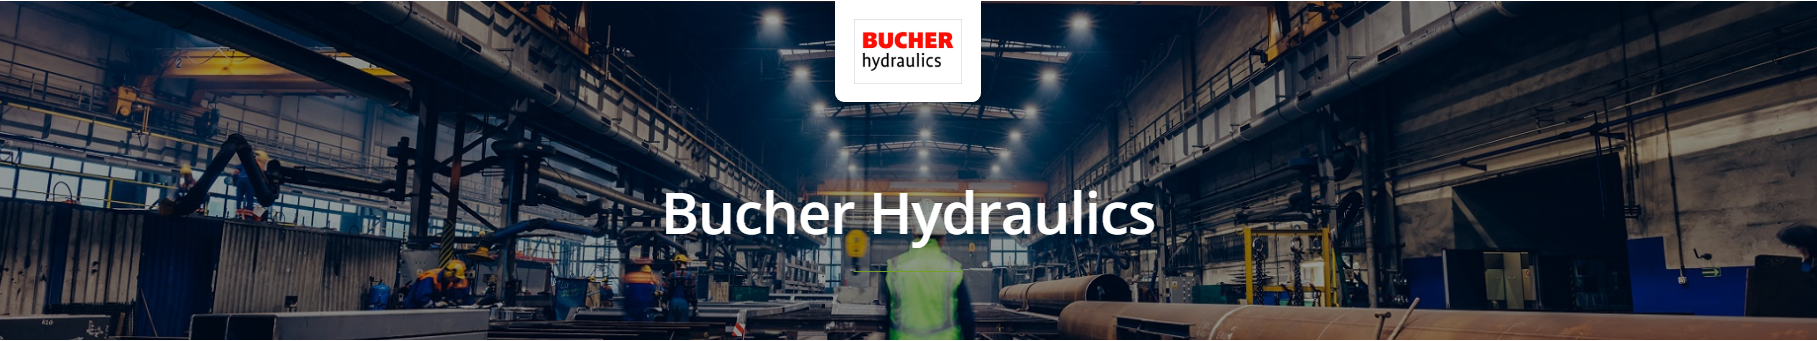 Bucher Hydraulics Flow Function Valves and Dividers